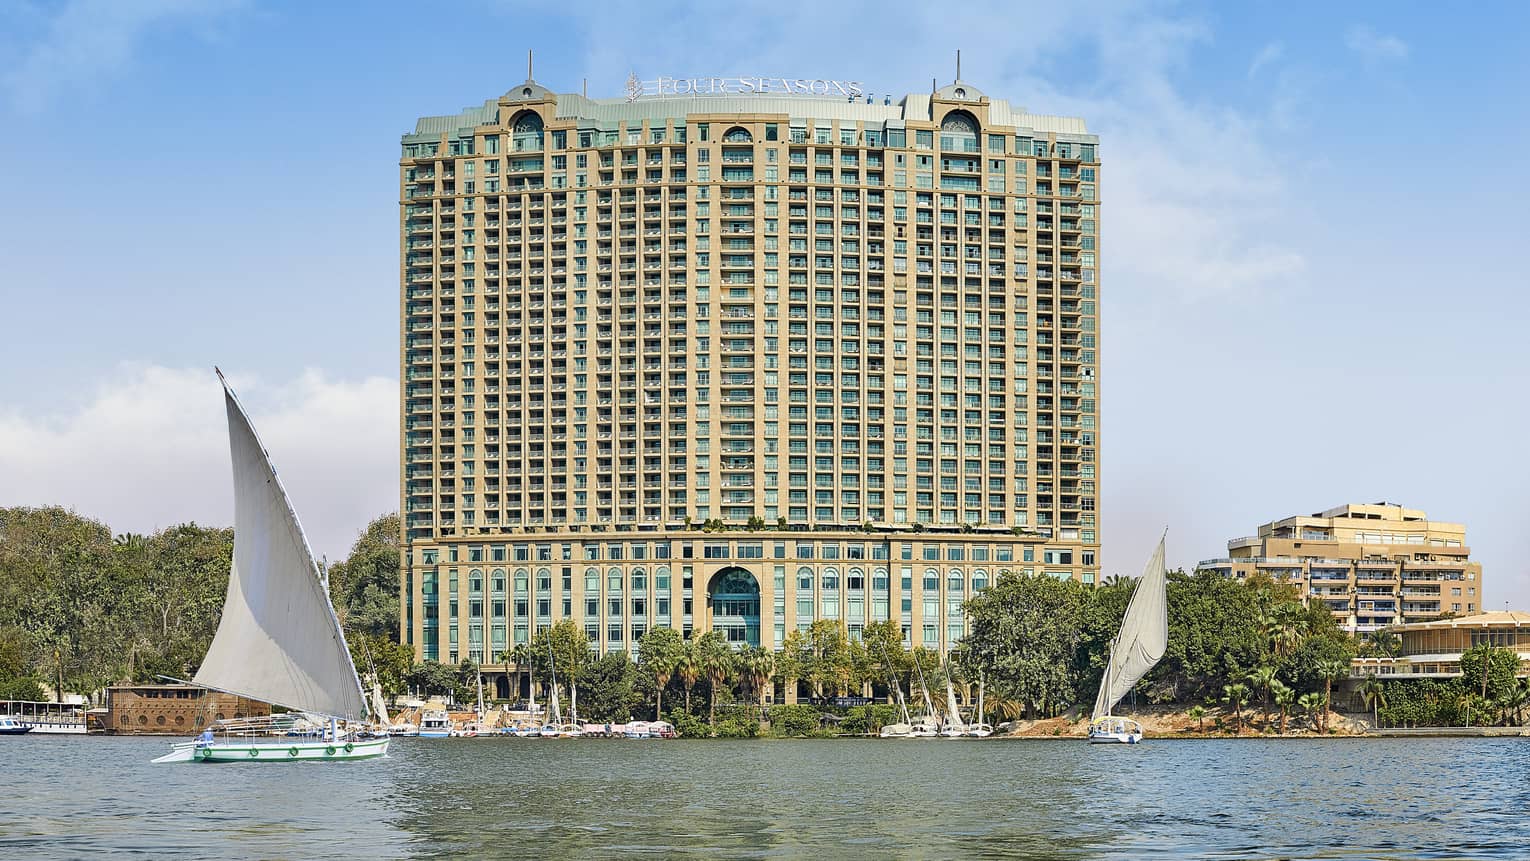 Exterior shot of a large hotel building on the water, sail boats can be seen in the foreground.